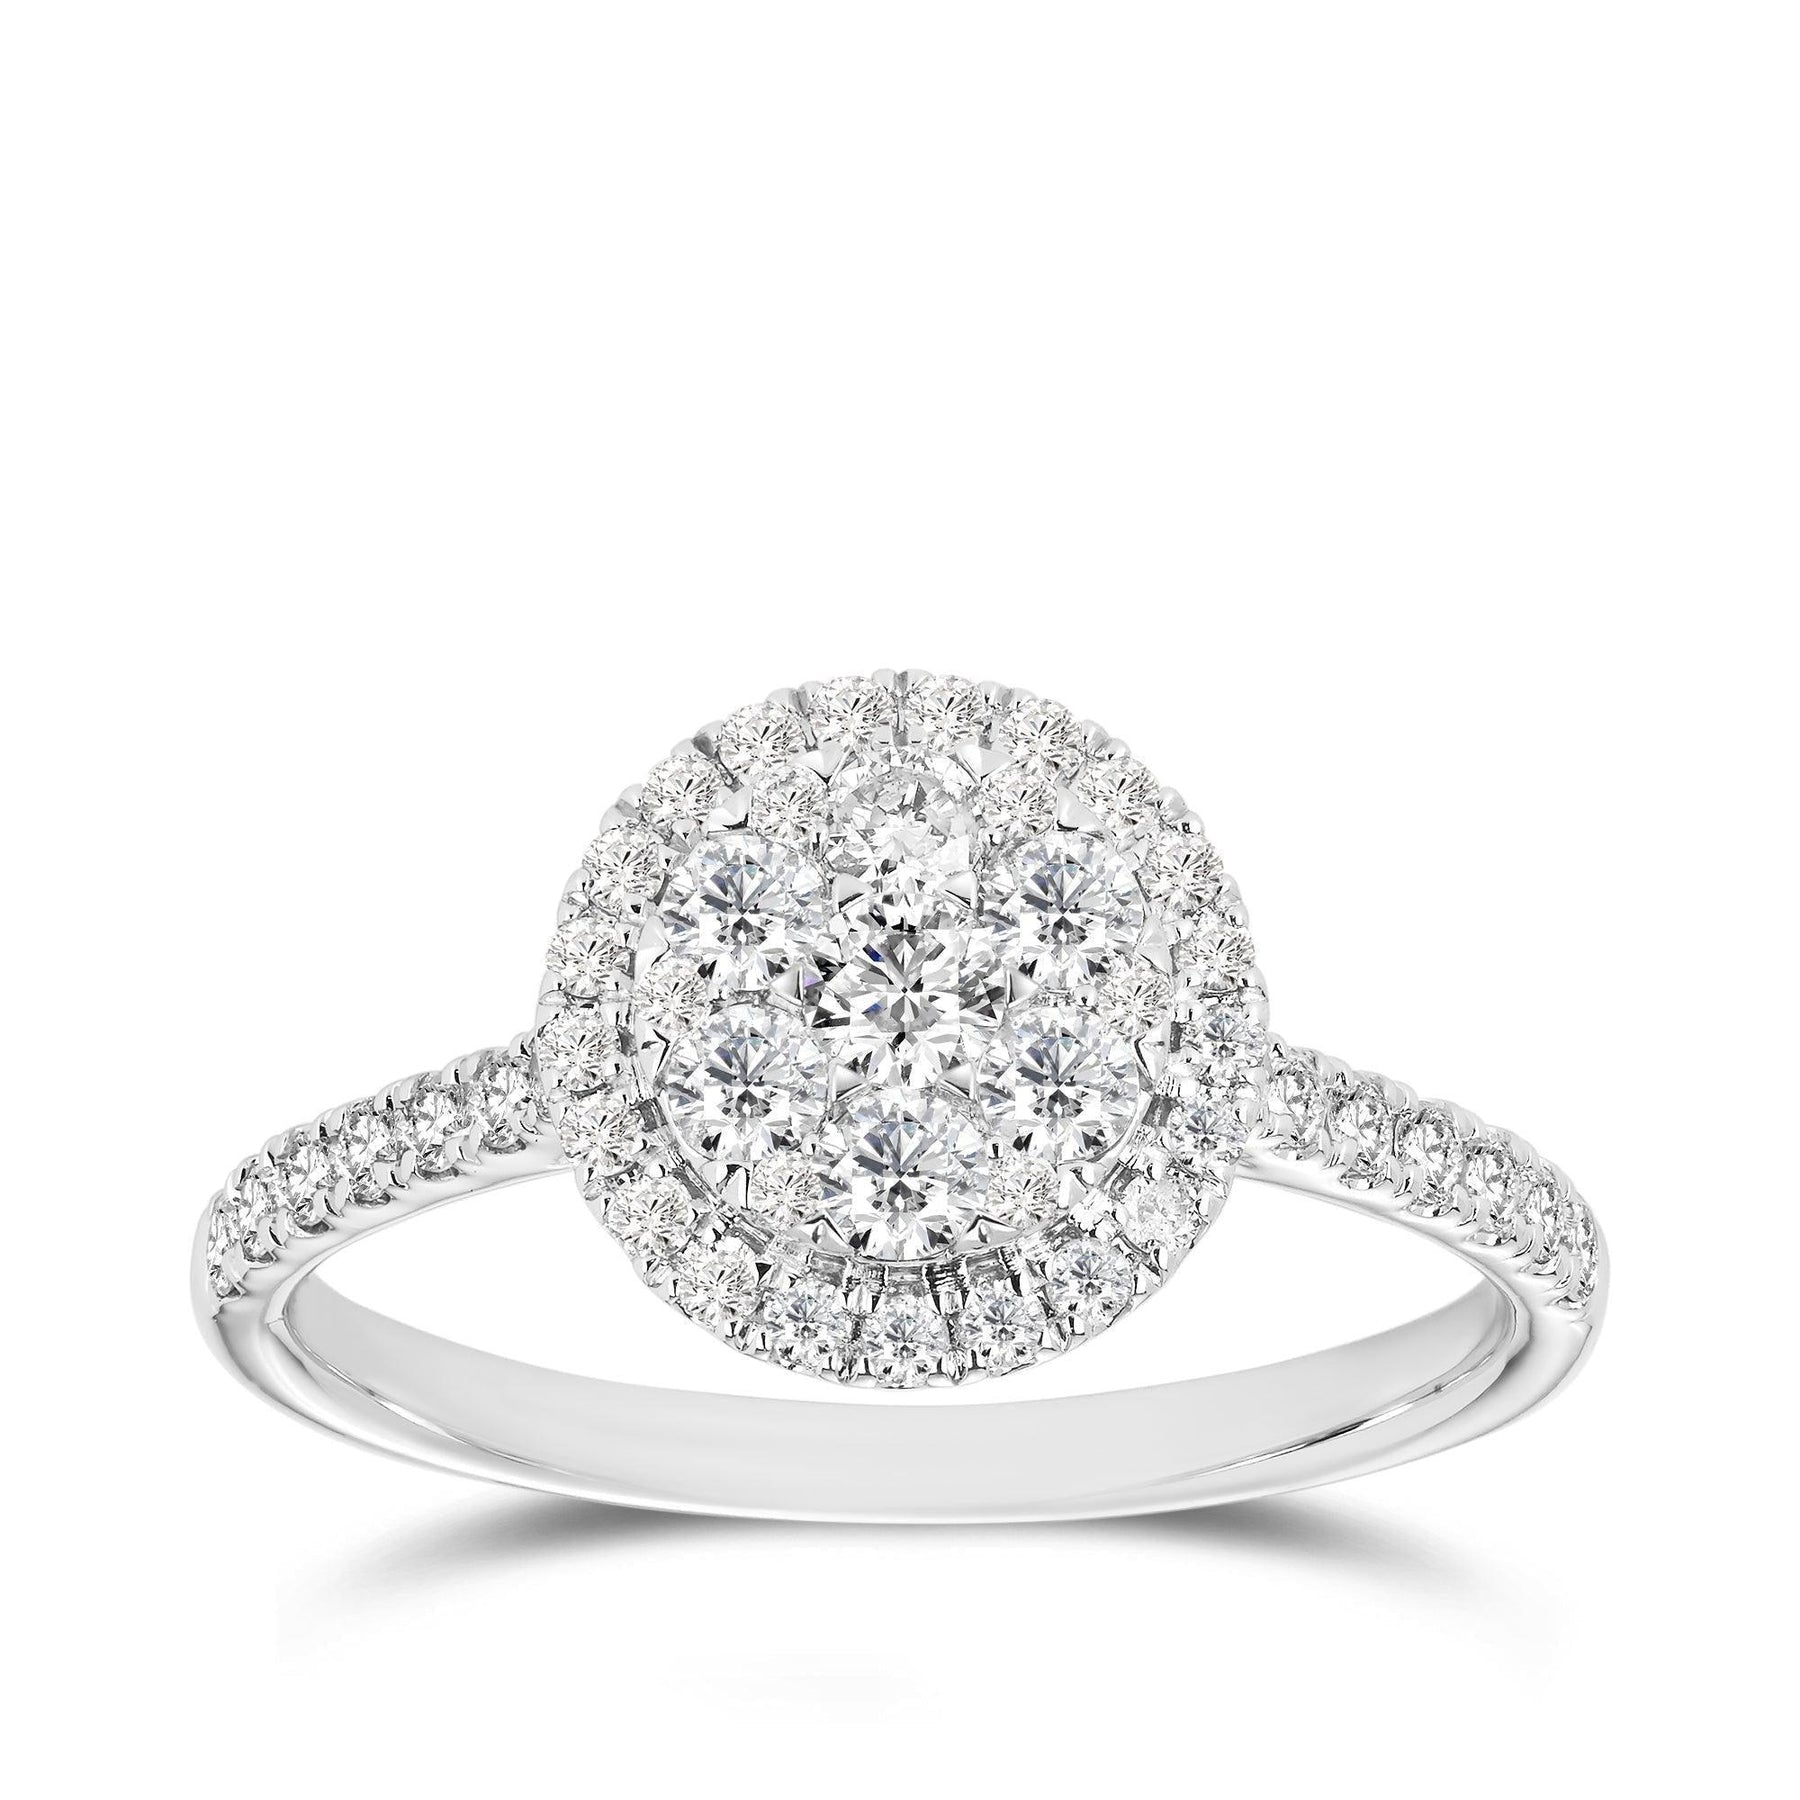 0.75ct TW Diamond Double Halo Round Engagement Ring in 9ct White Gold - Wallace Bishop